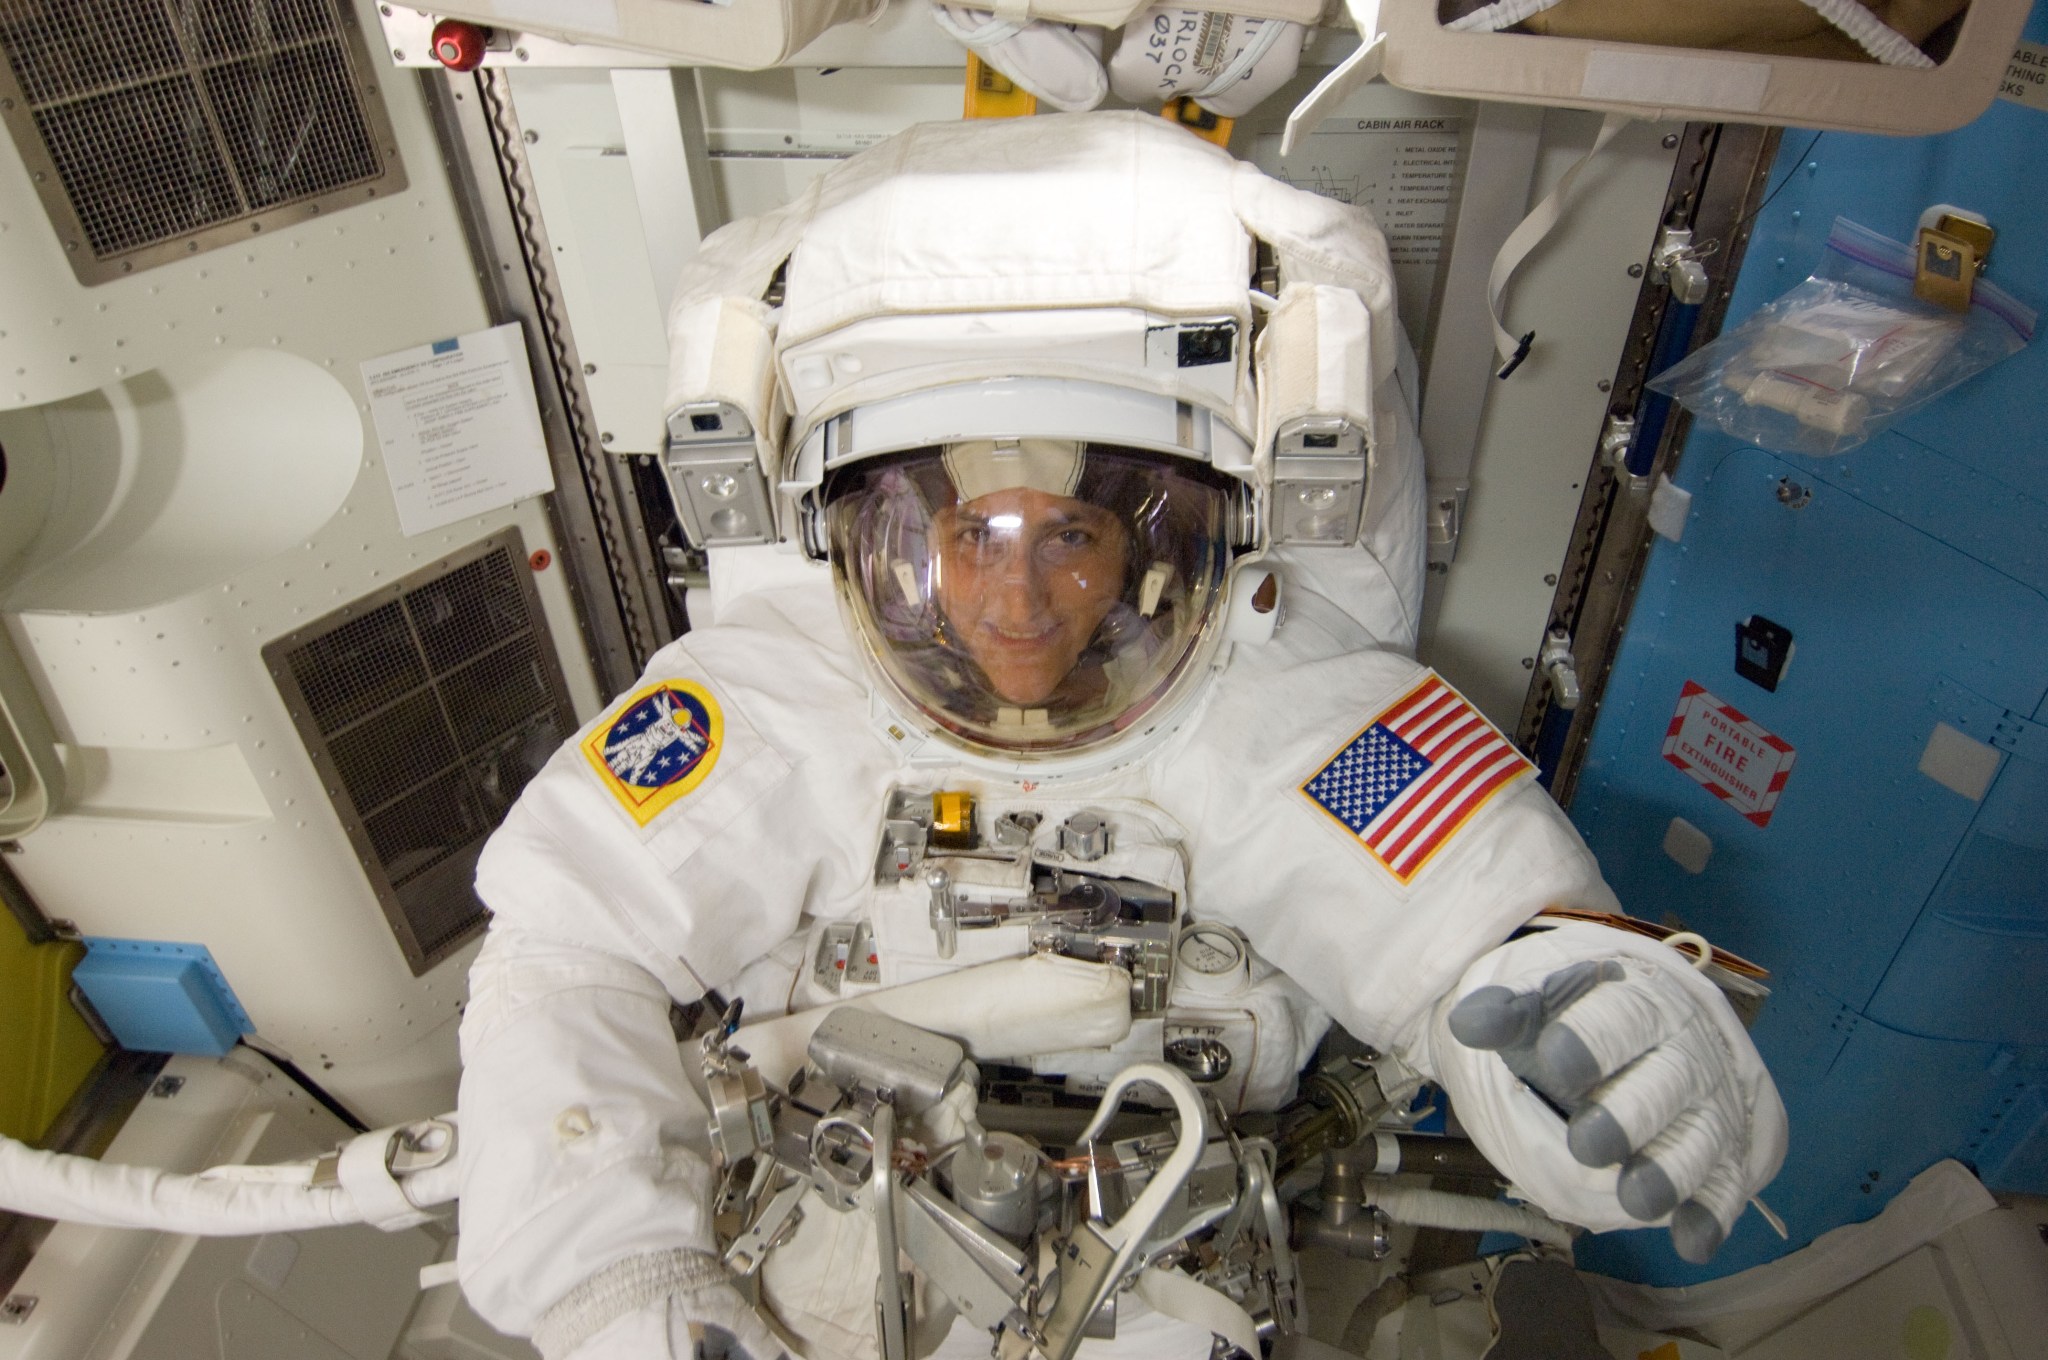 Astronaut Sunita Williams is pictured in the Quest airlock before beginning a spacewalk.